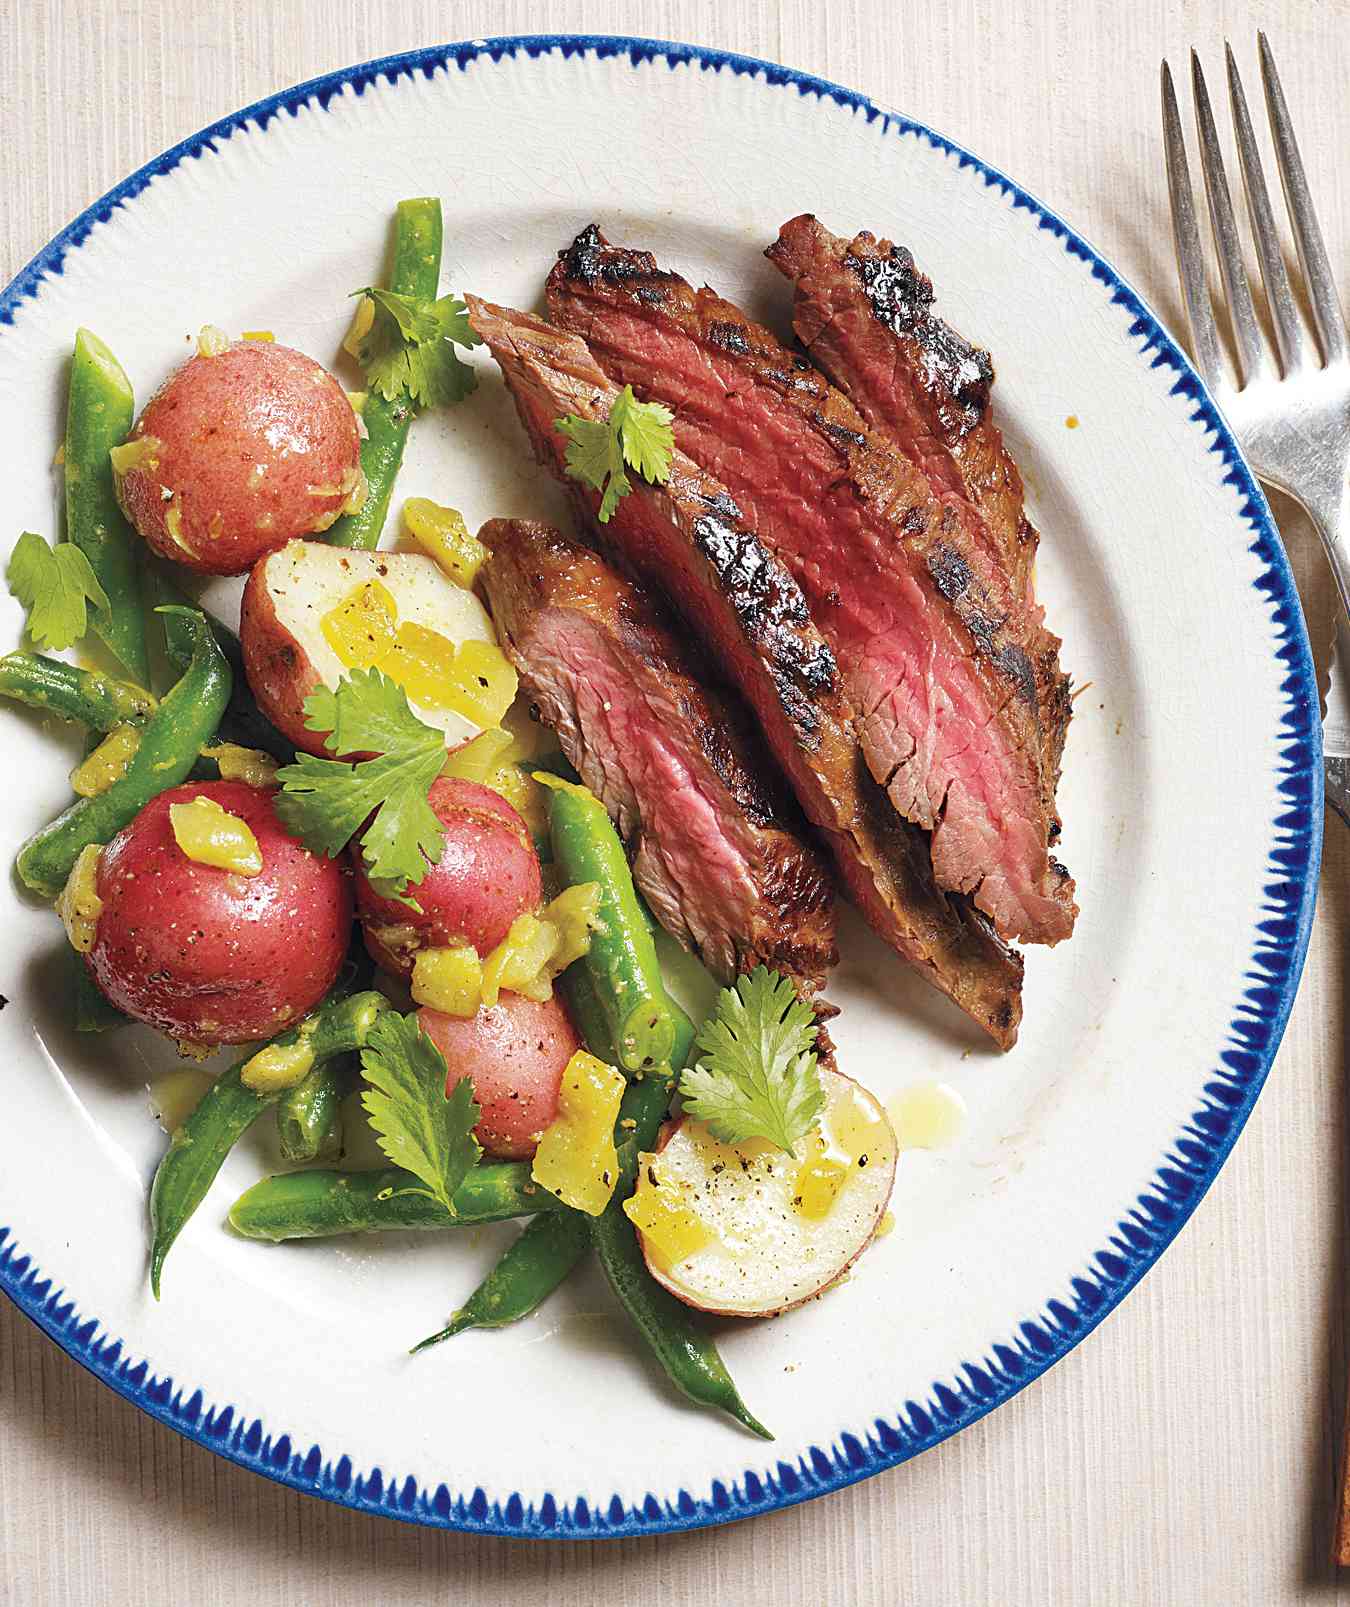 Pineapple-Marinated Steak With Spicy Potatoes and Green Beans 